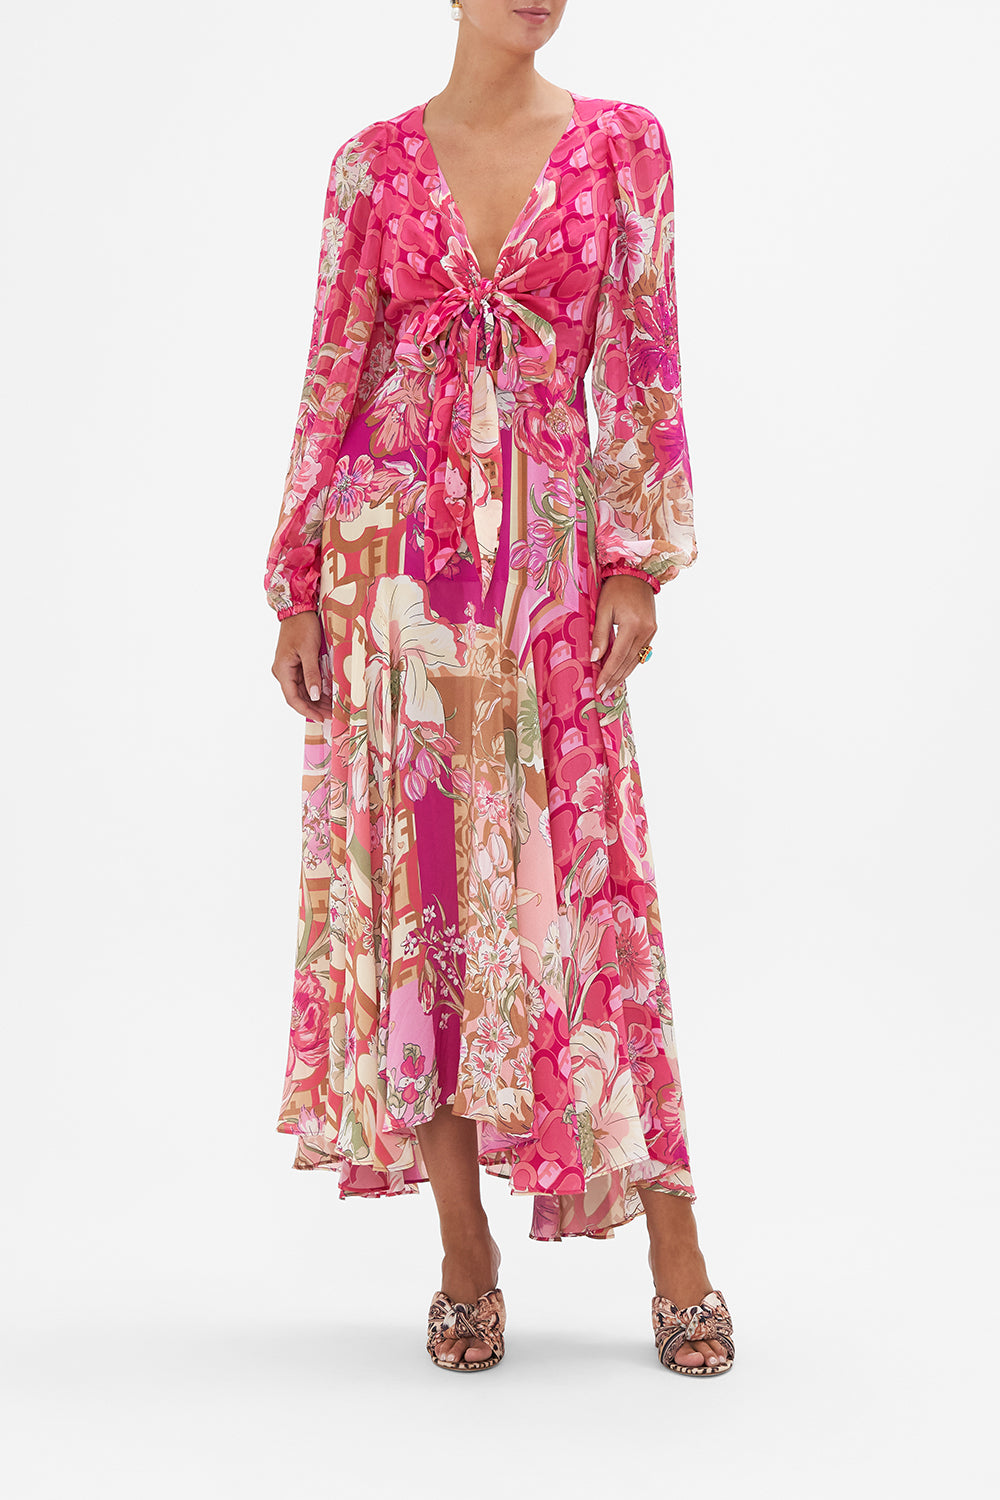 Front view of model wearing CAMILLA pink silk floral dress in A Girl Named Florence print